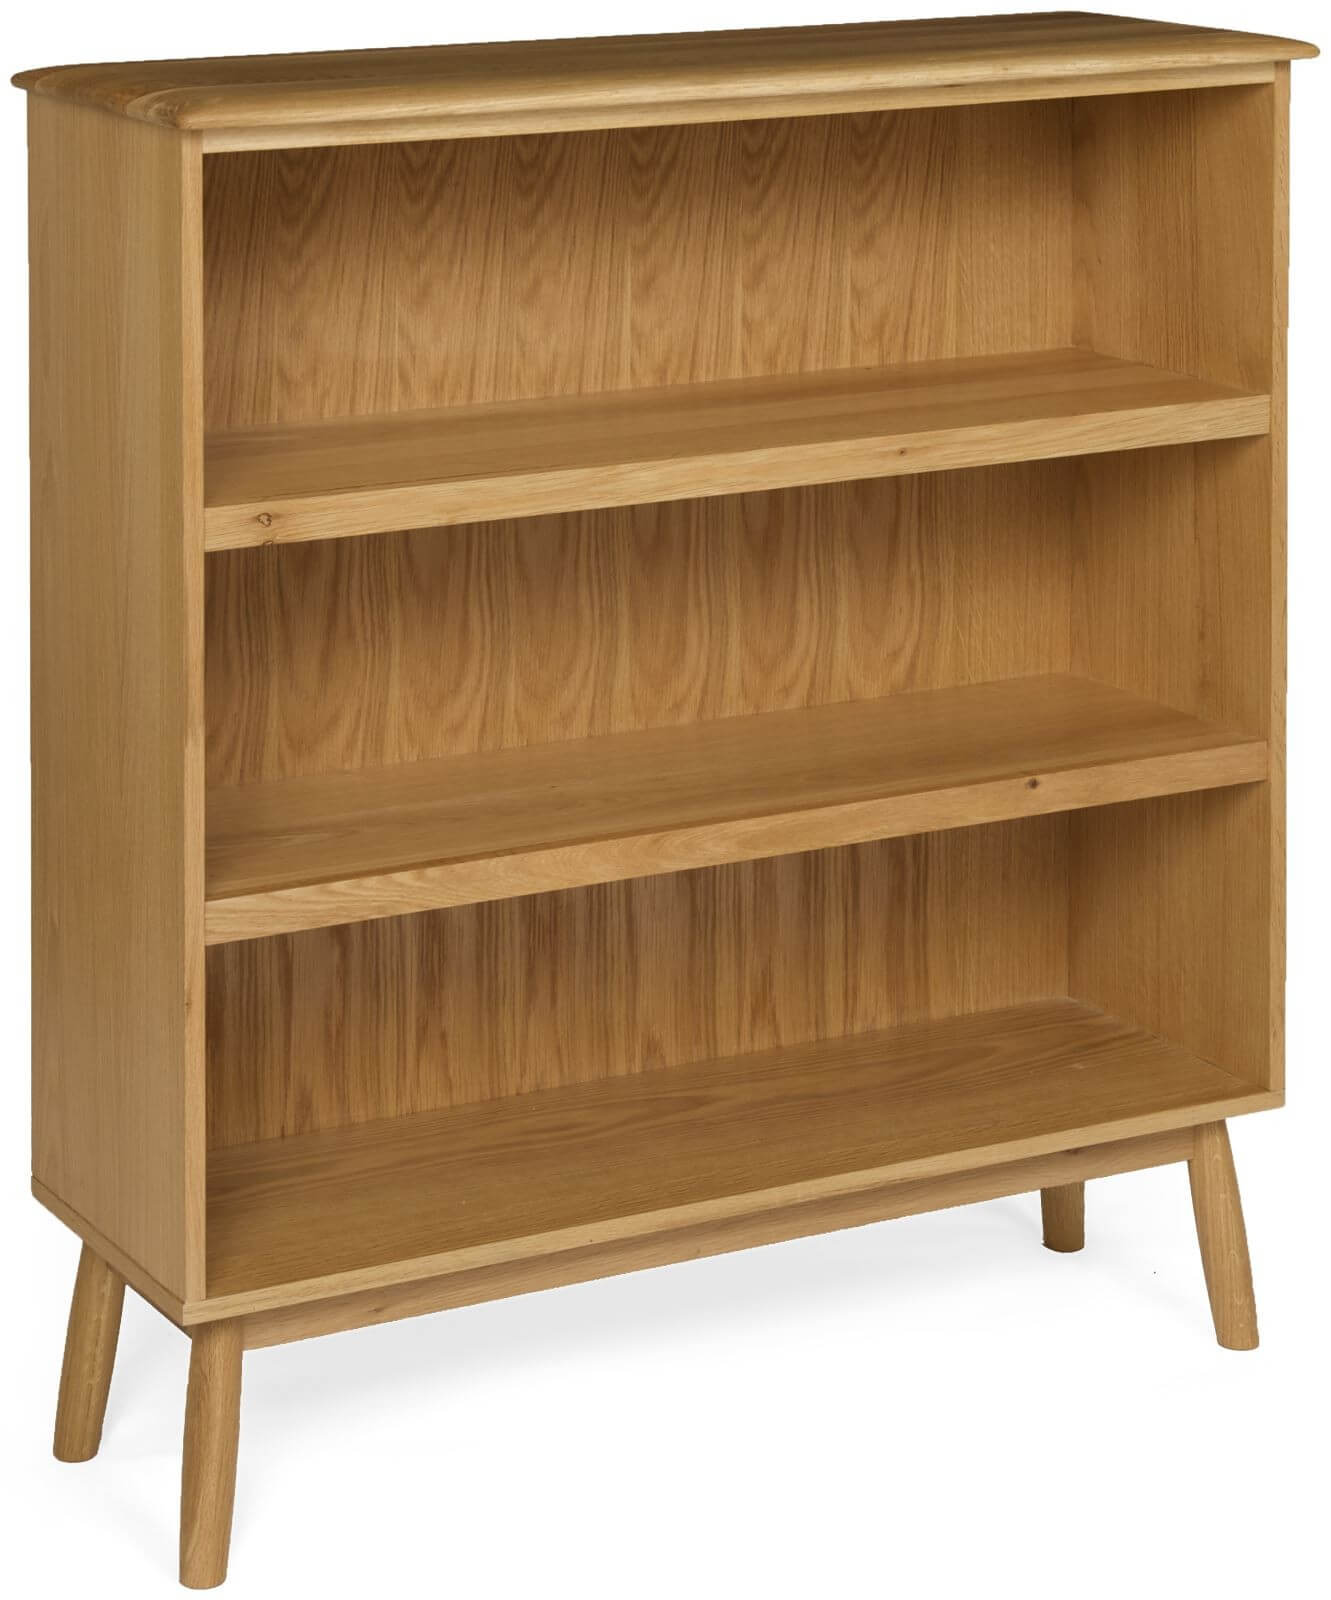 Showing image for Bergen wide bookcase